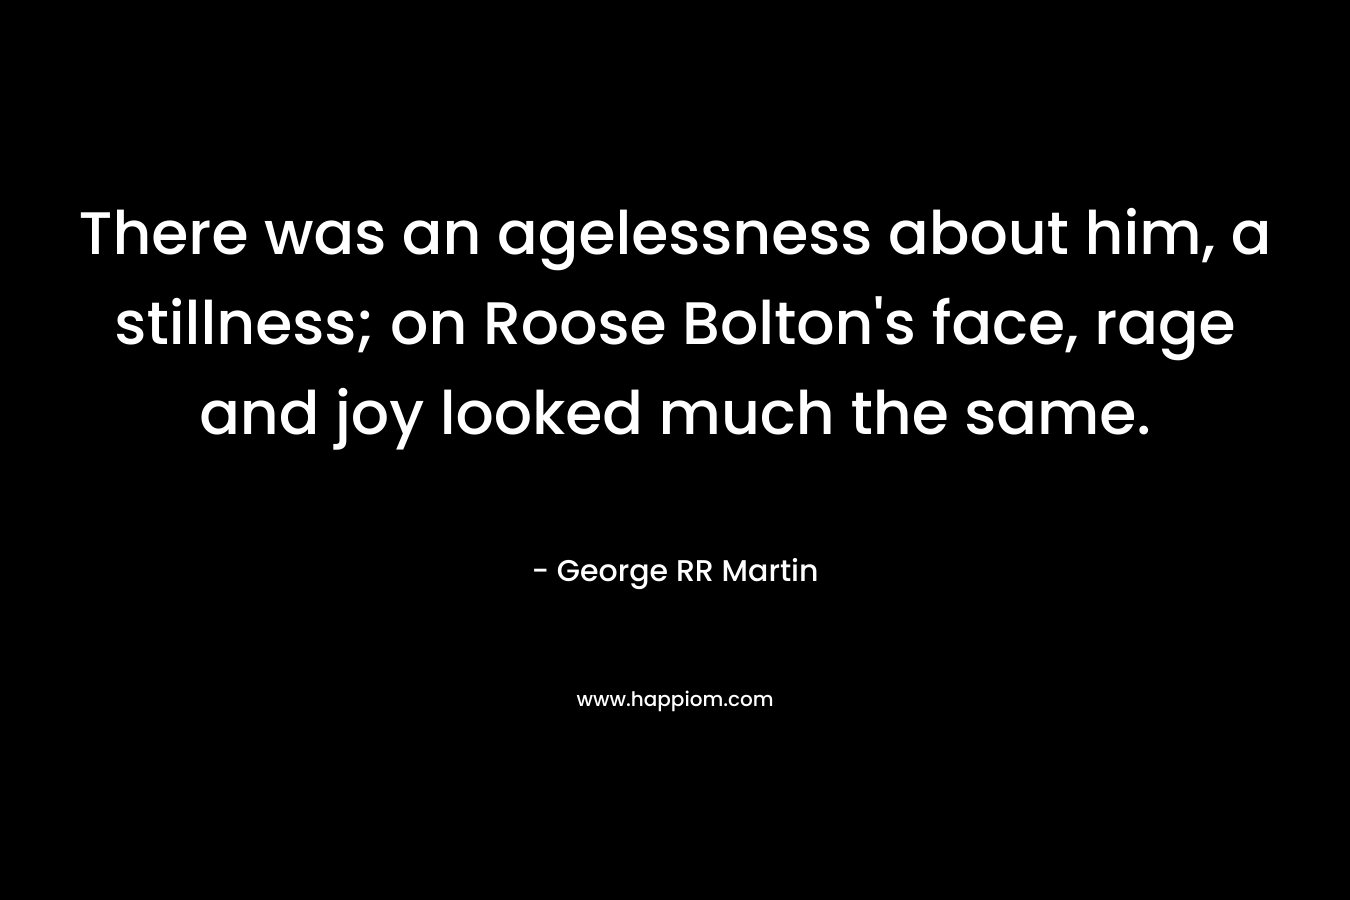 There was an agelessness about him, a stillness; on Roose Bolton's face, rage and joy looked much the same.